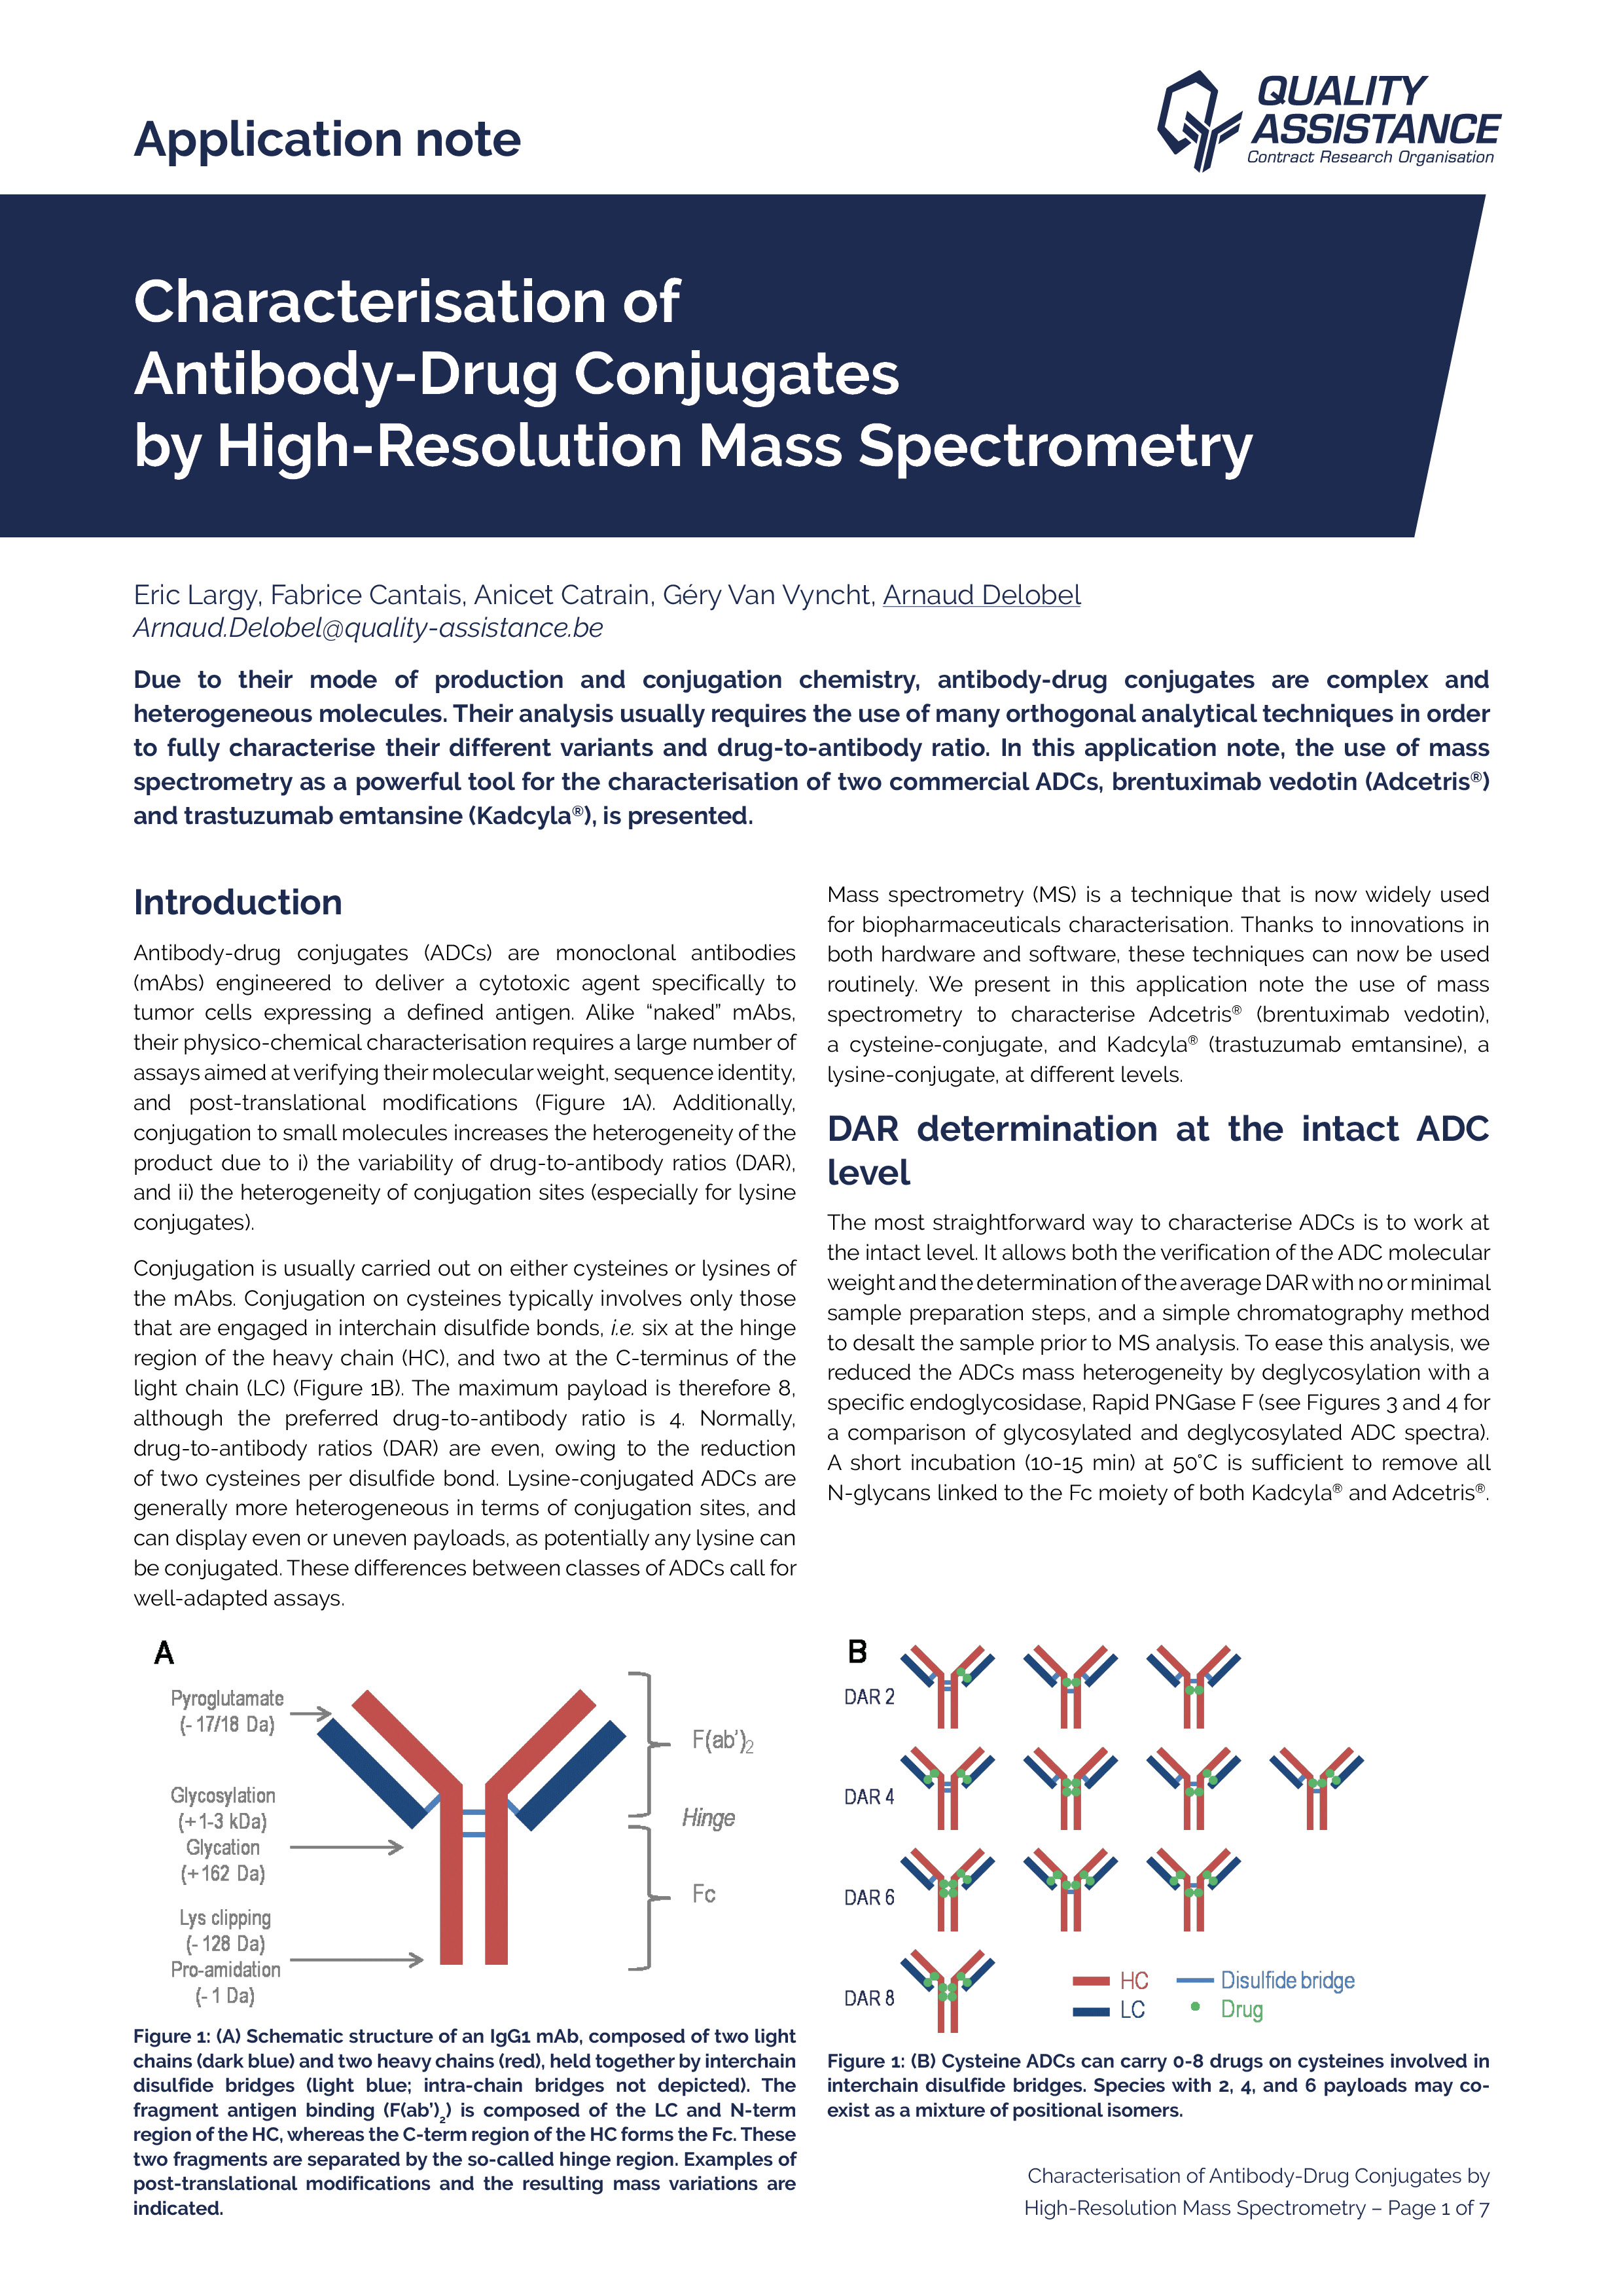 Characterisation of Antibody-Drug Conjugates by High-Resolution Mass Spectrometry